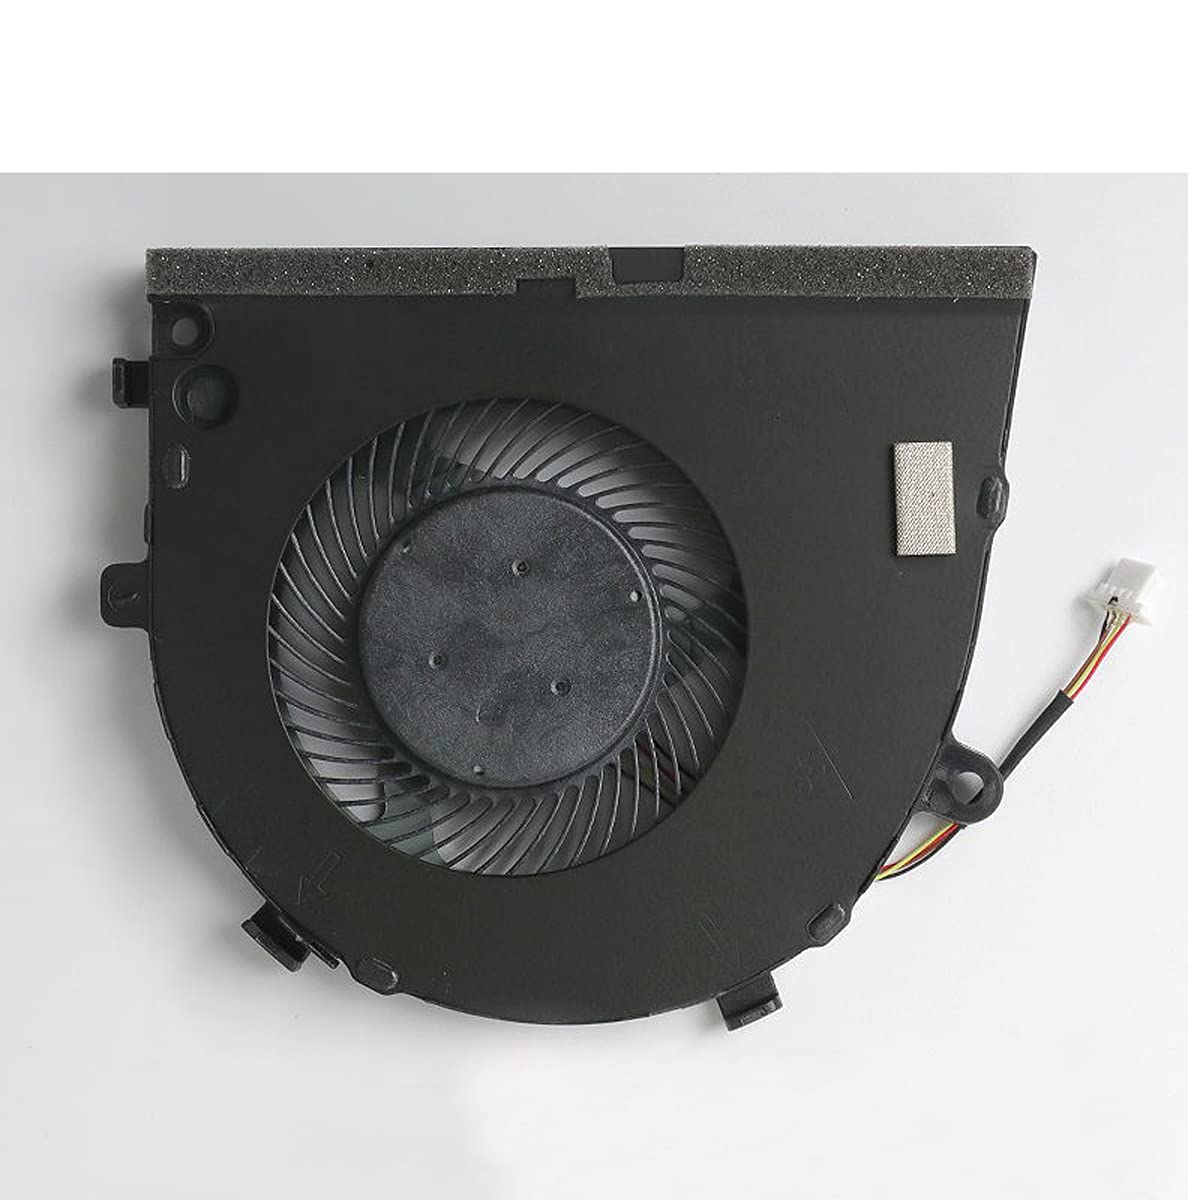 HK-Part Fan Replacement for Dell-inspiron Game G3 G3-3579 3779 FKB7 Cooling Fan DP/N 0GWMFV 4-Pin